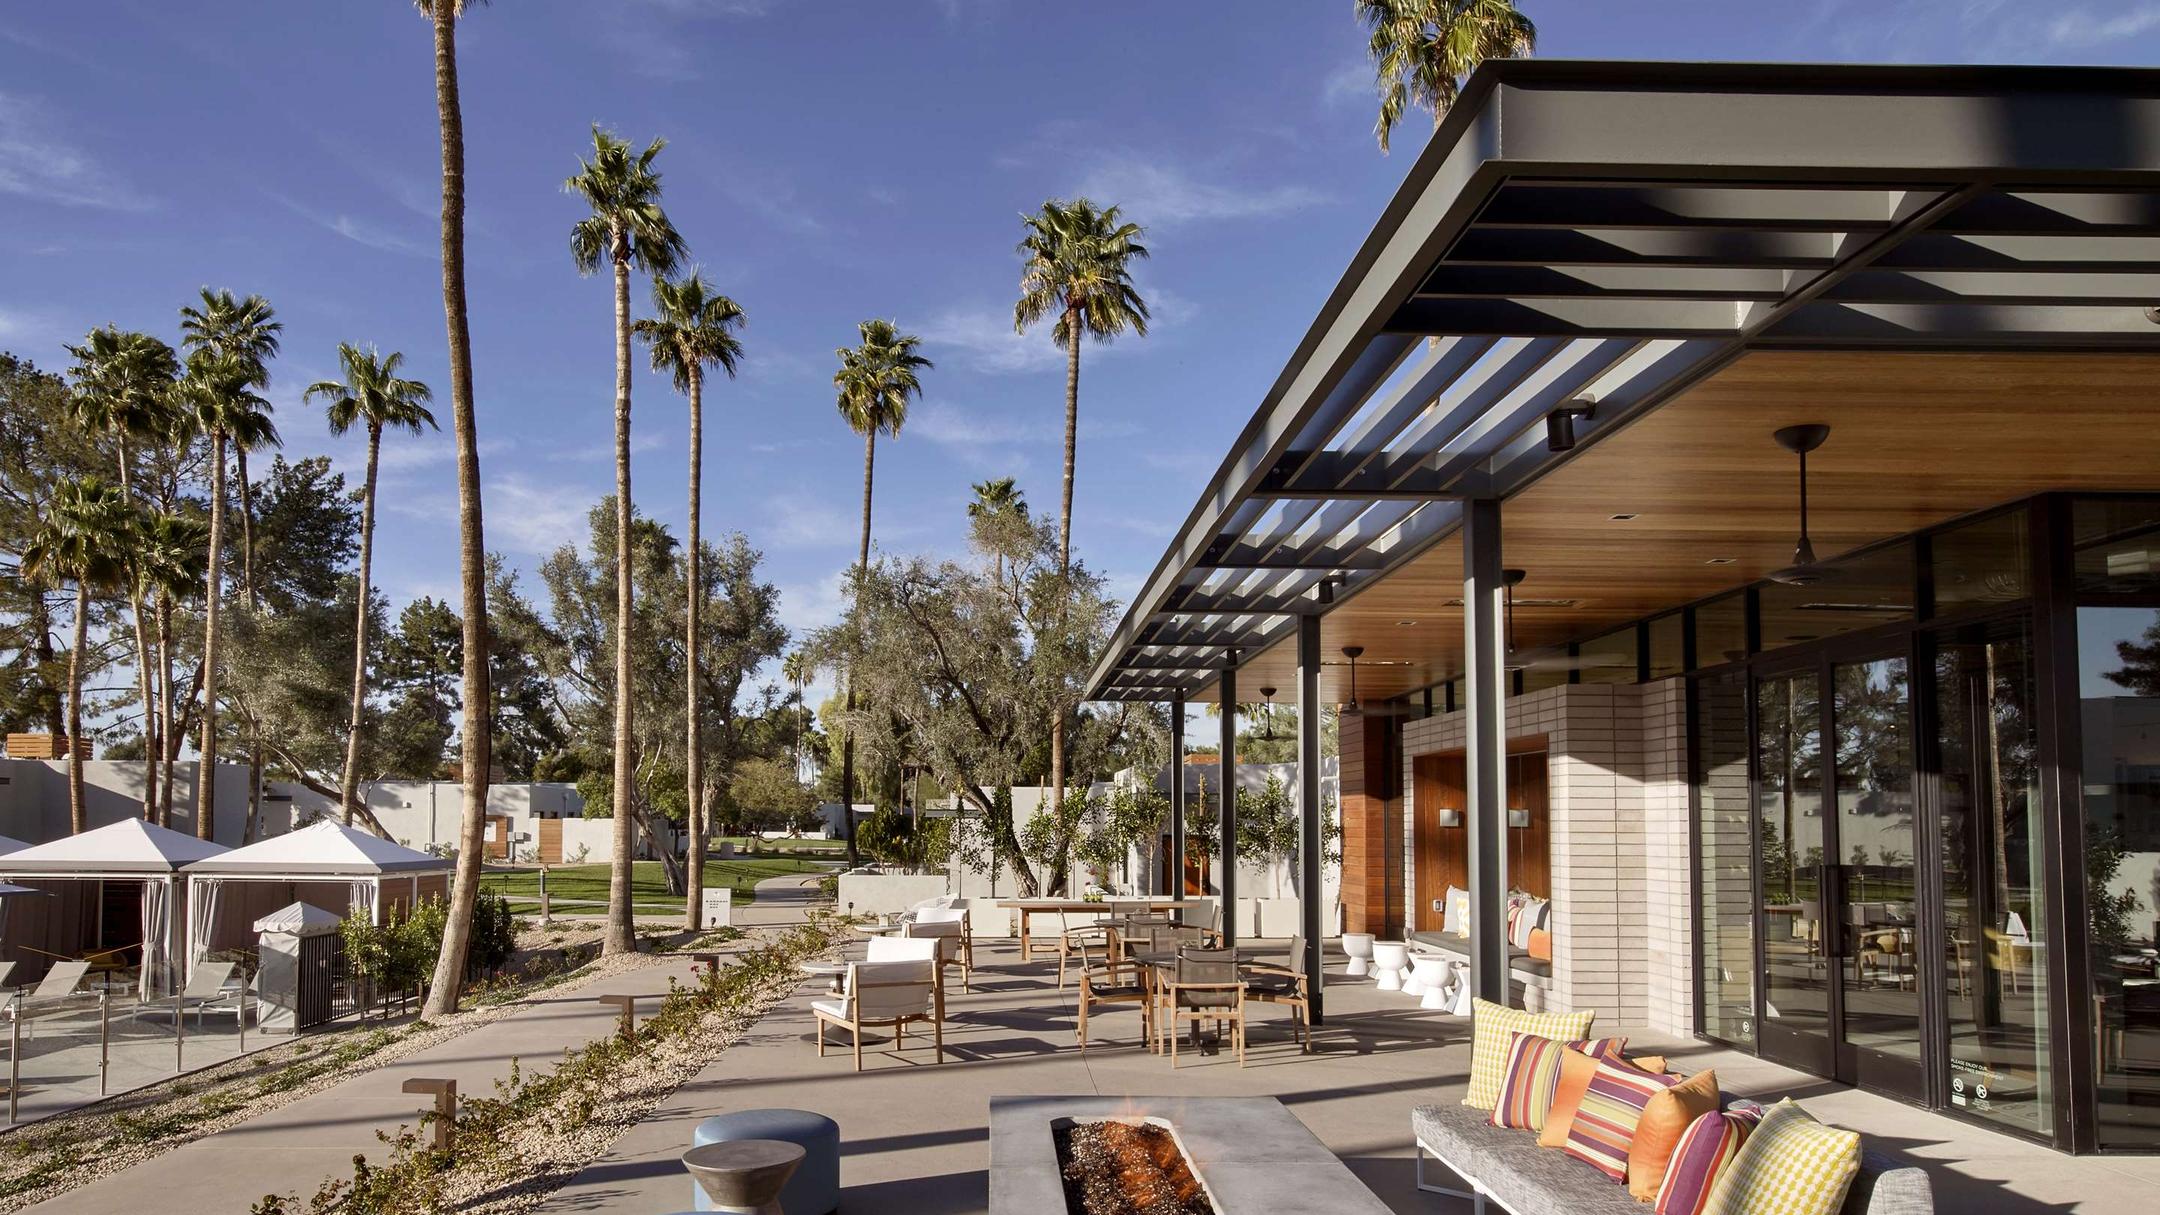 Andaz Scottsdale Resort and Bungalows $348. Scottsdale Hotel Deals ...